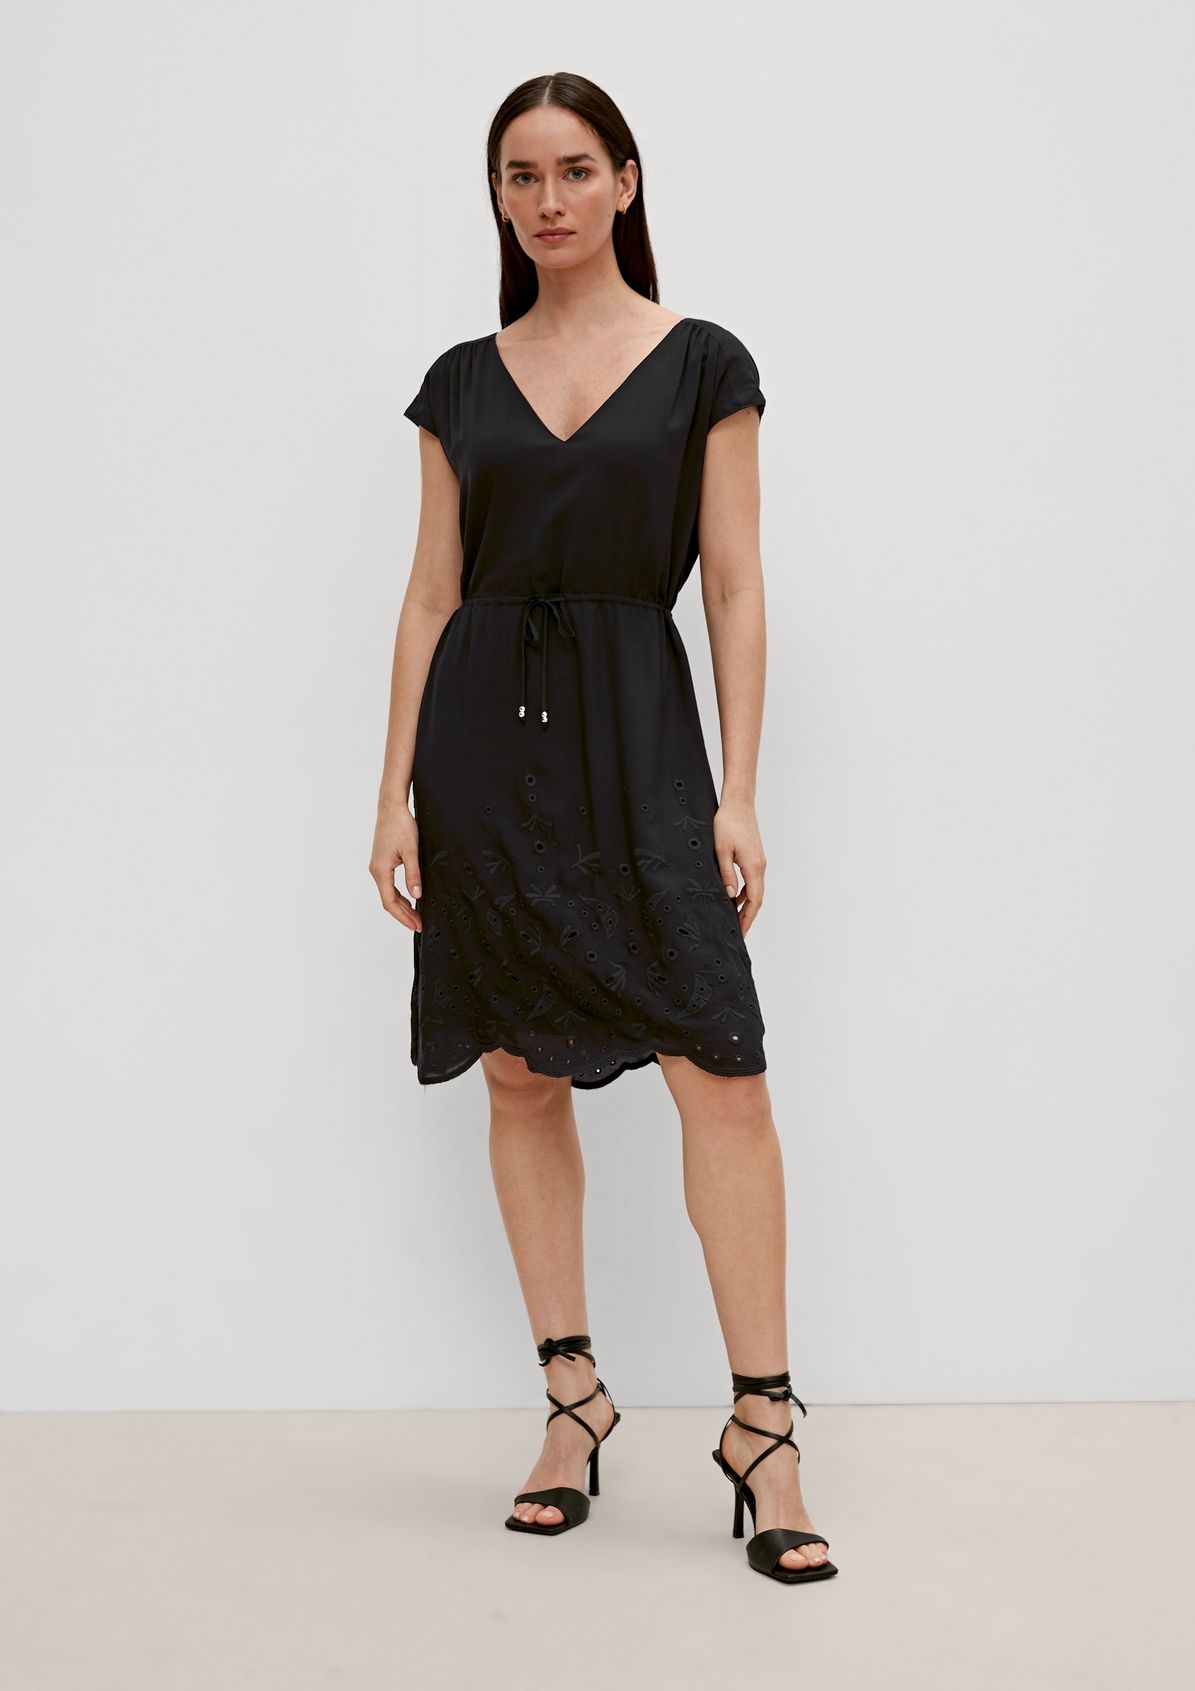 Dress with a double drawstring from comma